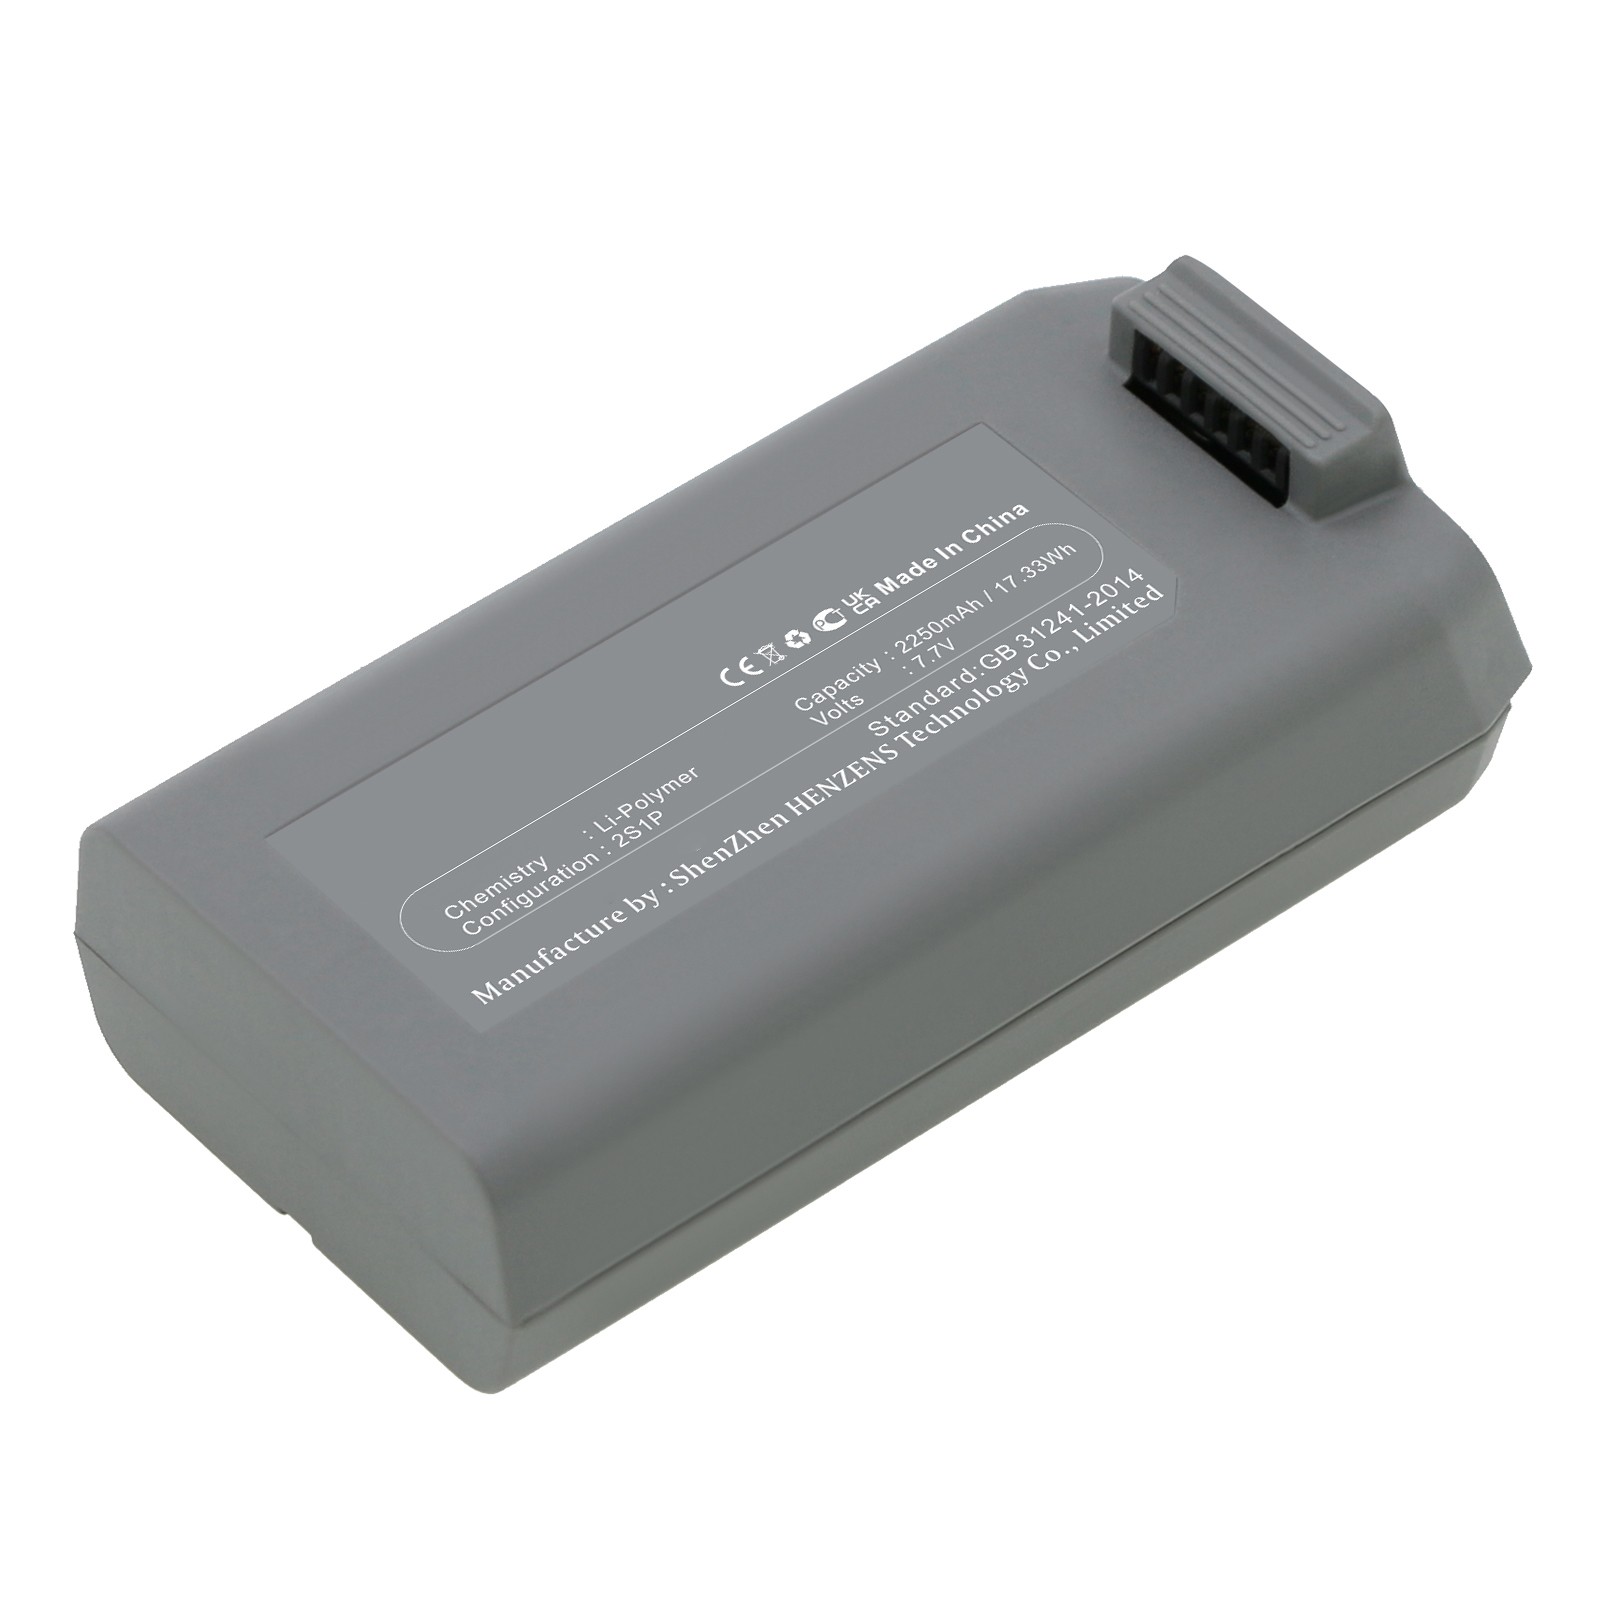 Batteries for DJIQuadcopter Drone